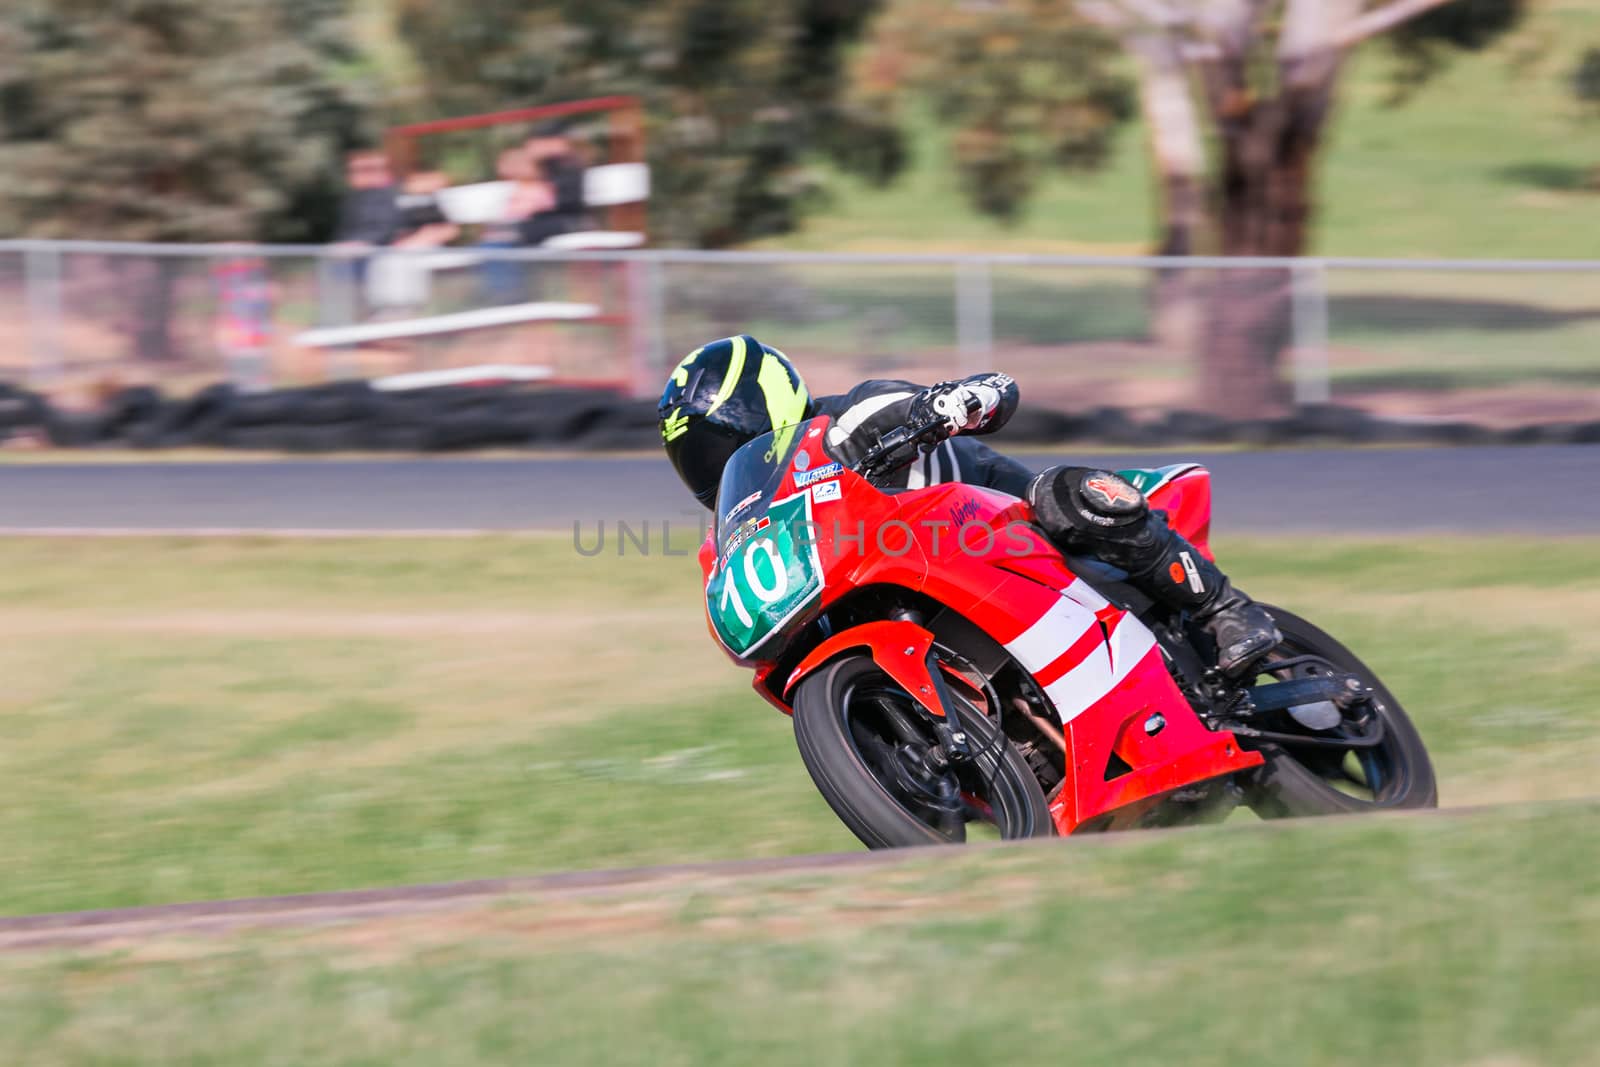 Hartwell Motorcycle Club Championship - Round 5 by davidhewison